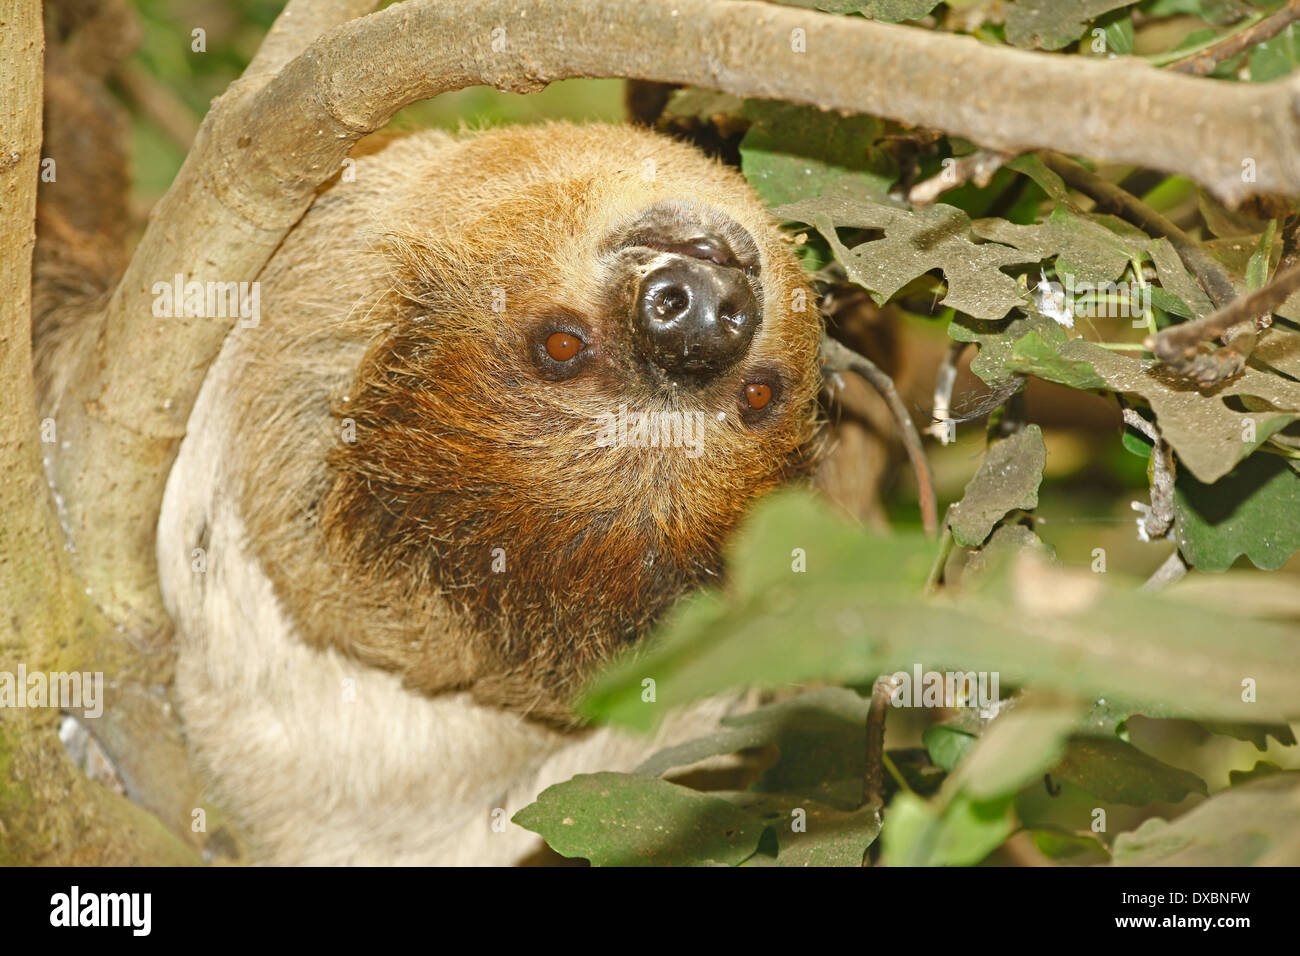 Linné's Two-toed Sloth, or Southern Two-toed Sloth (Choloepus didactylus) closeup in Tropical Forest habitat Stock Photo